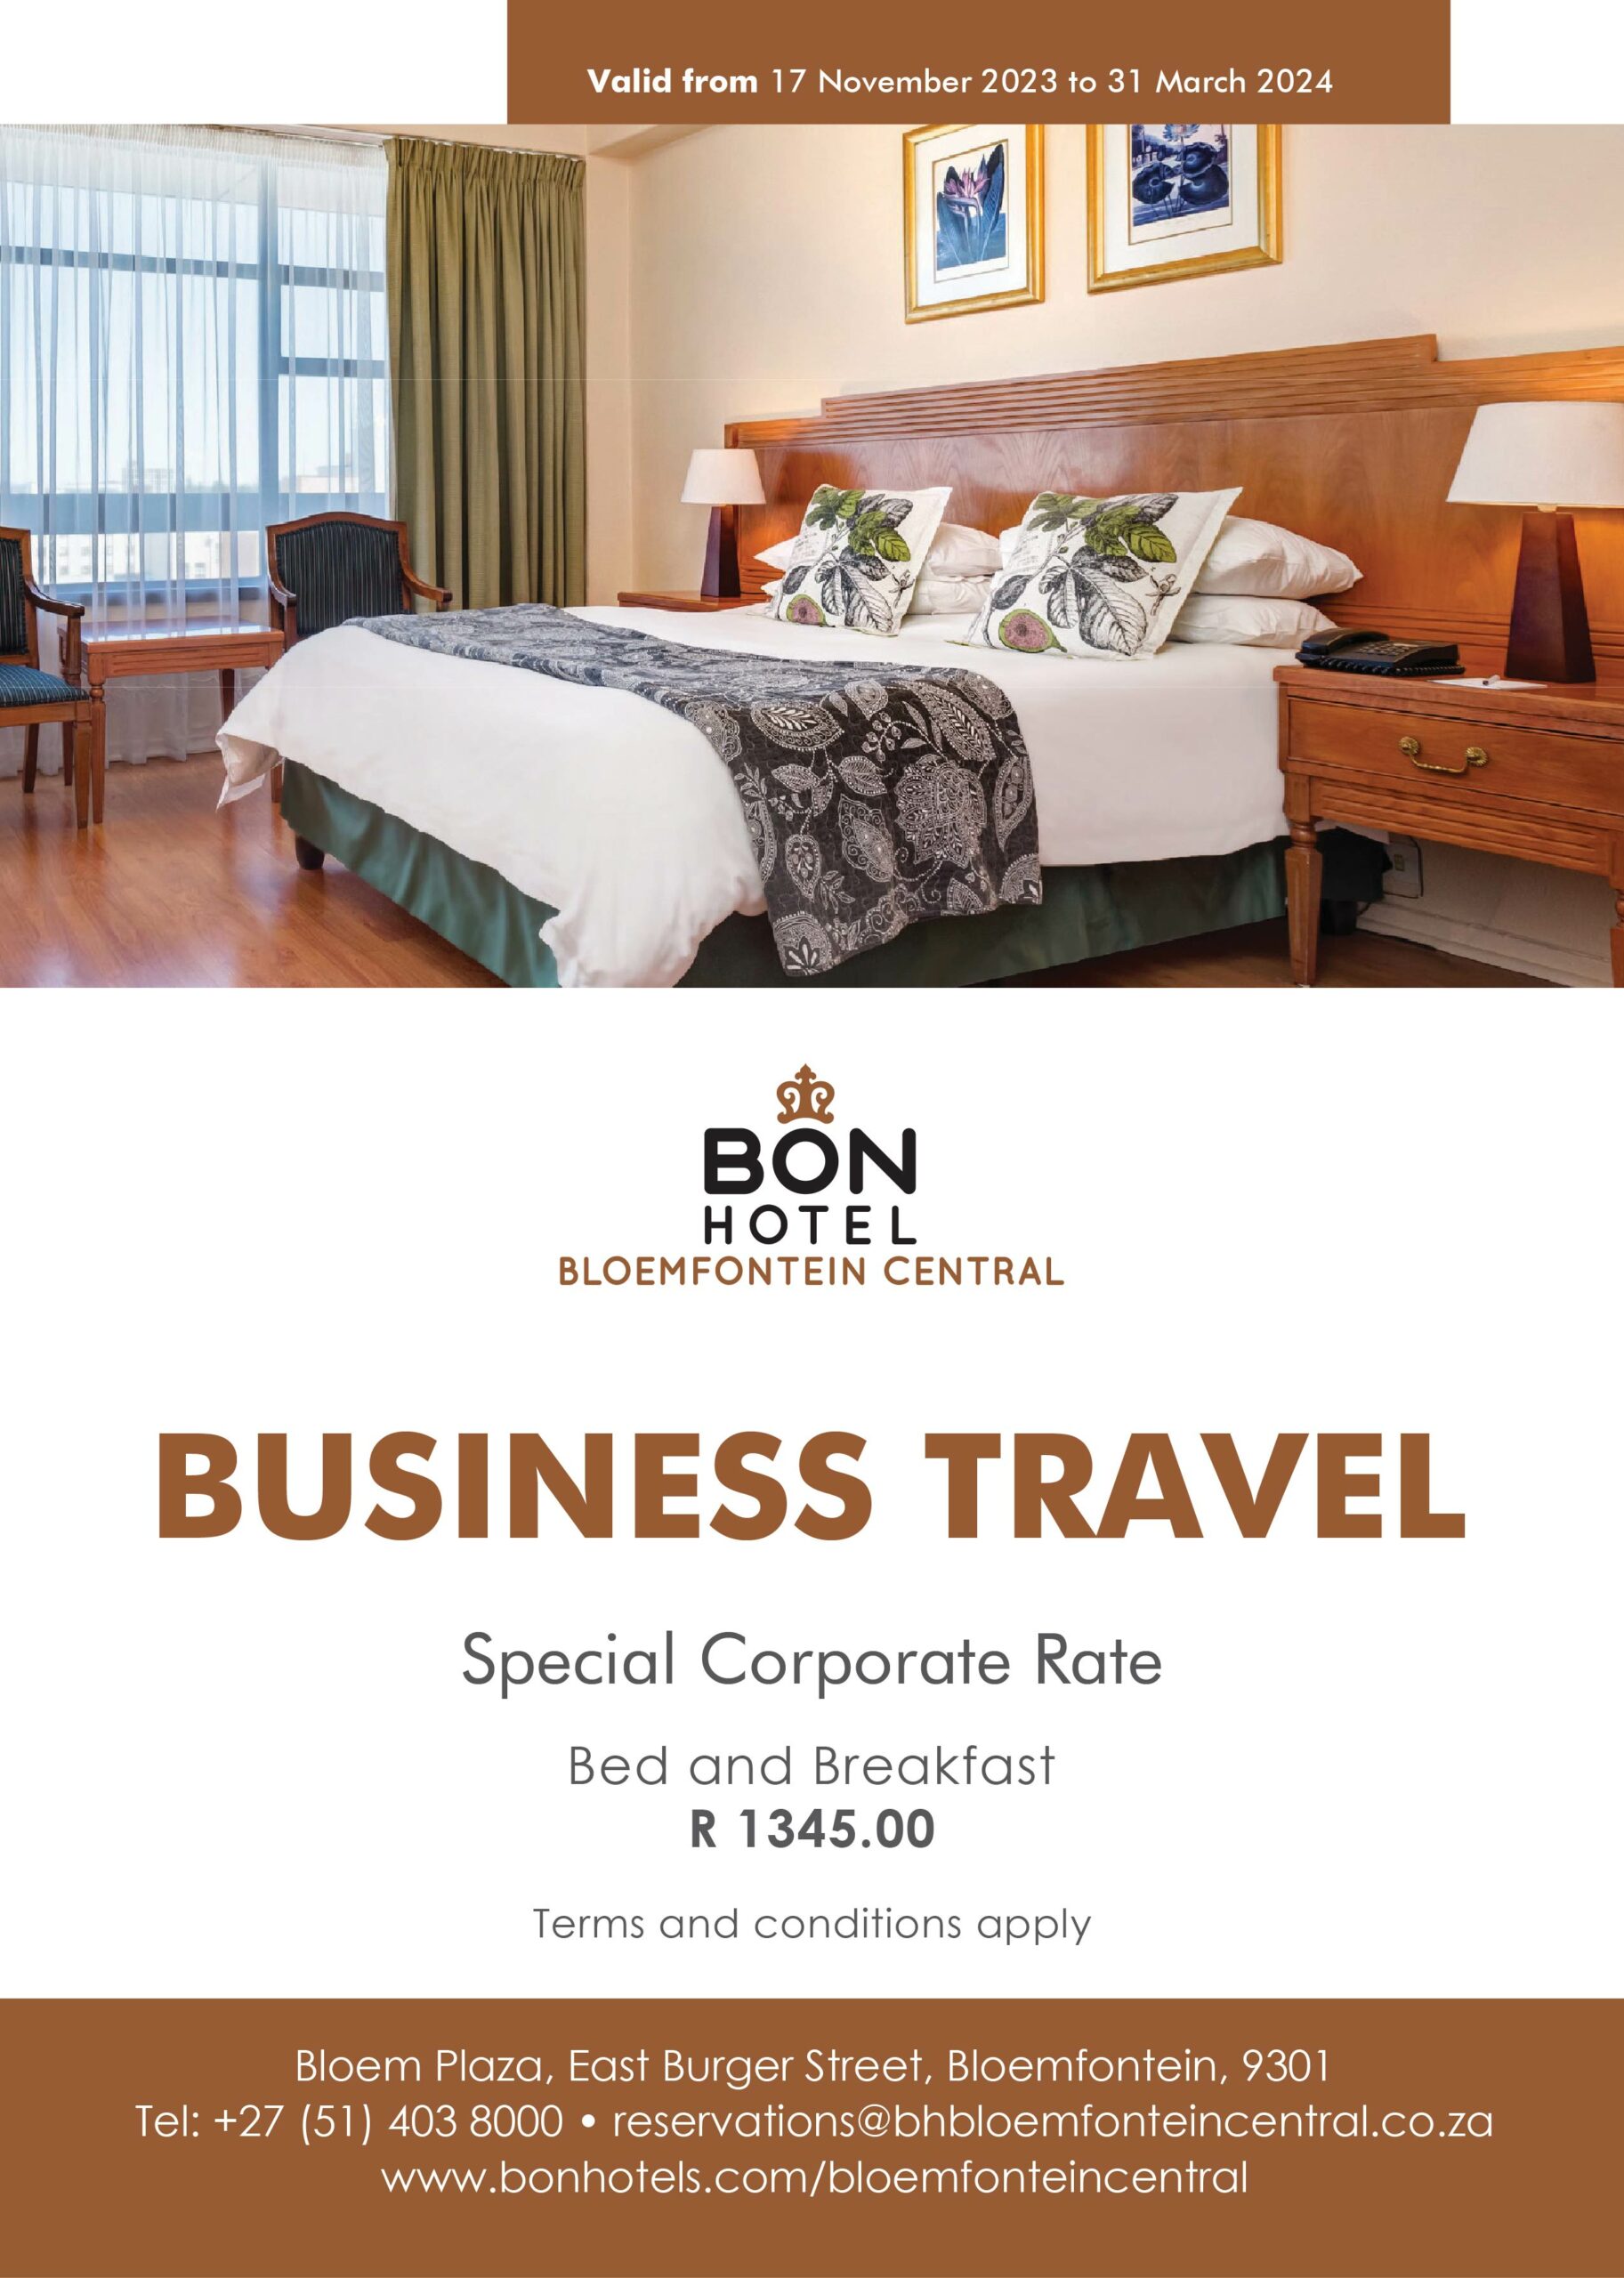 BON Getaway Deal & Packages | Business Travel Special Rate at BON Hotel Bloemfontein Central |  R1345 with Bed & Breakfast 